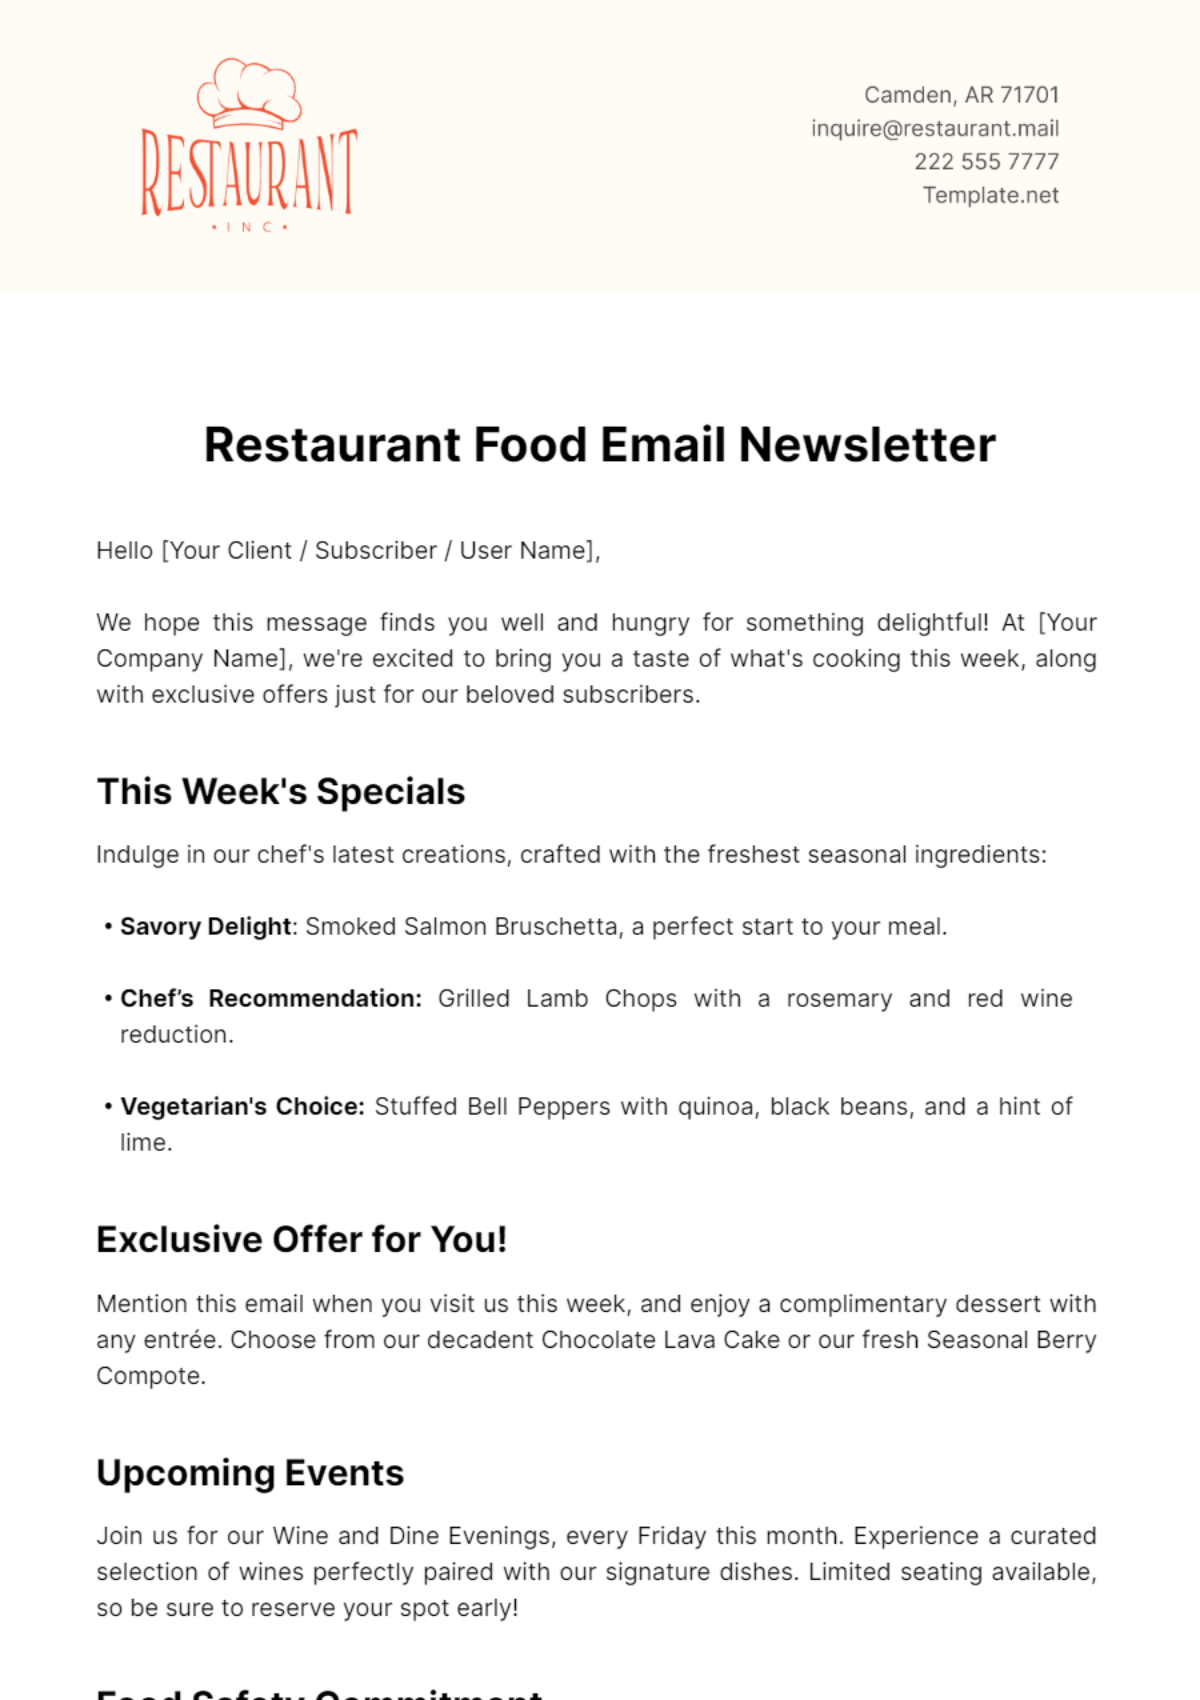 Free Restaurant Food Email Newsletter Template